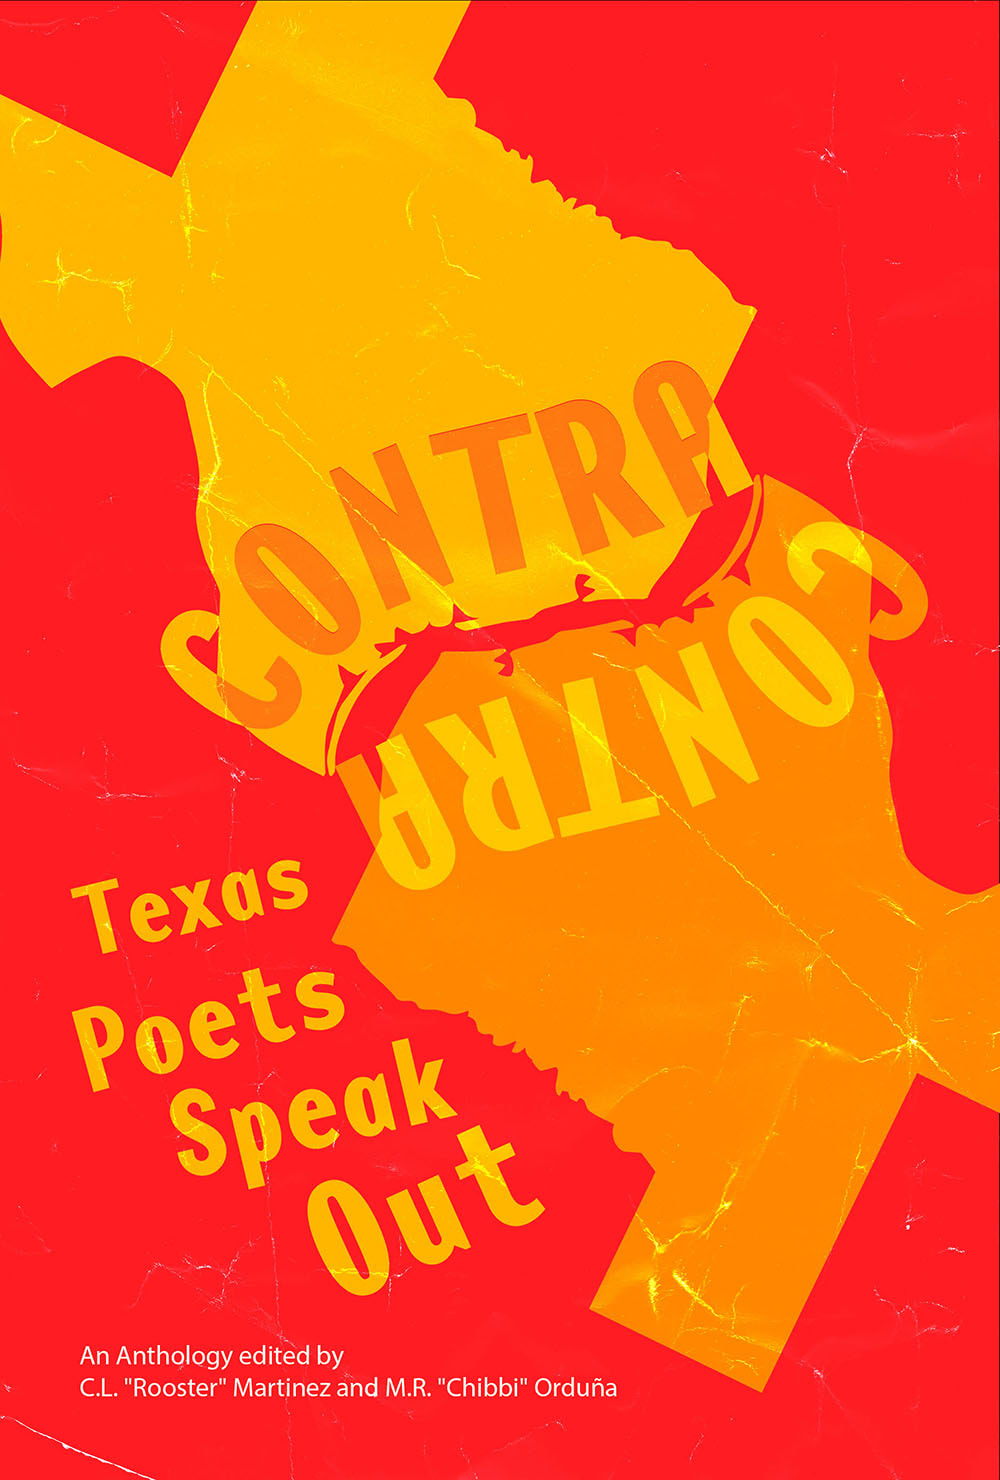 Front cover of the book Contra Texas poets speak out. There is a map of texas